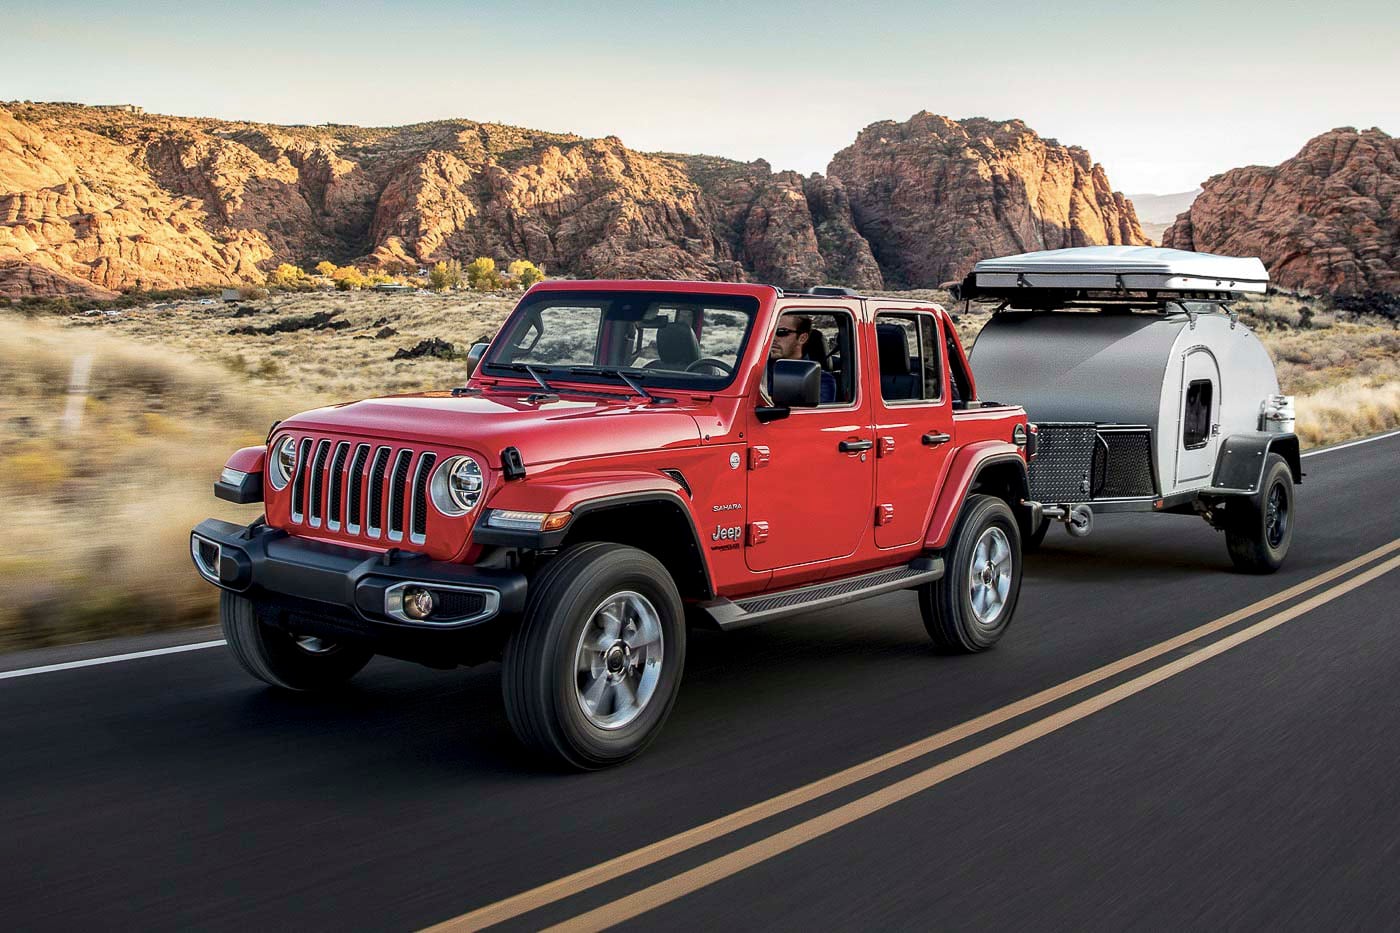 three quarter front view of the 2022 Jeep Wrangler on a road towing a trailer